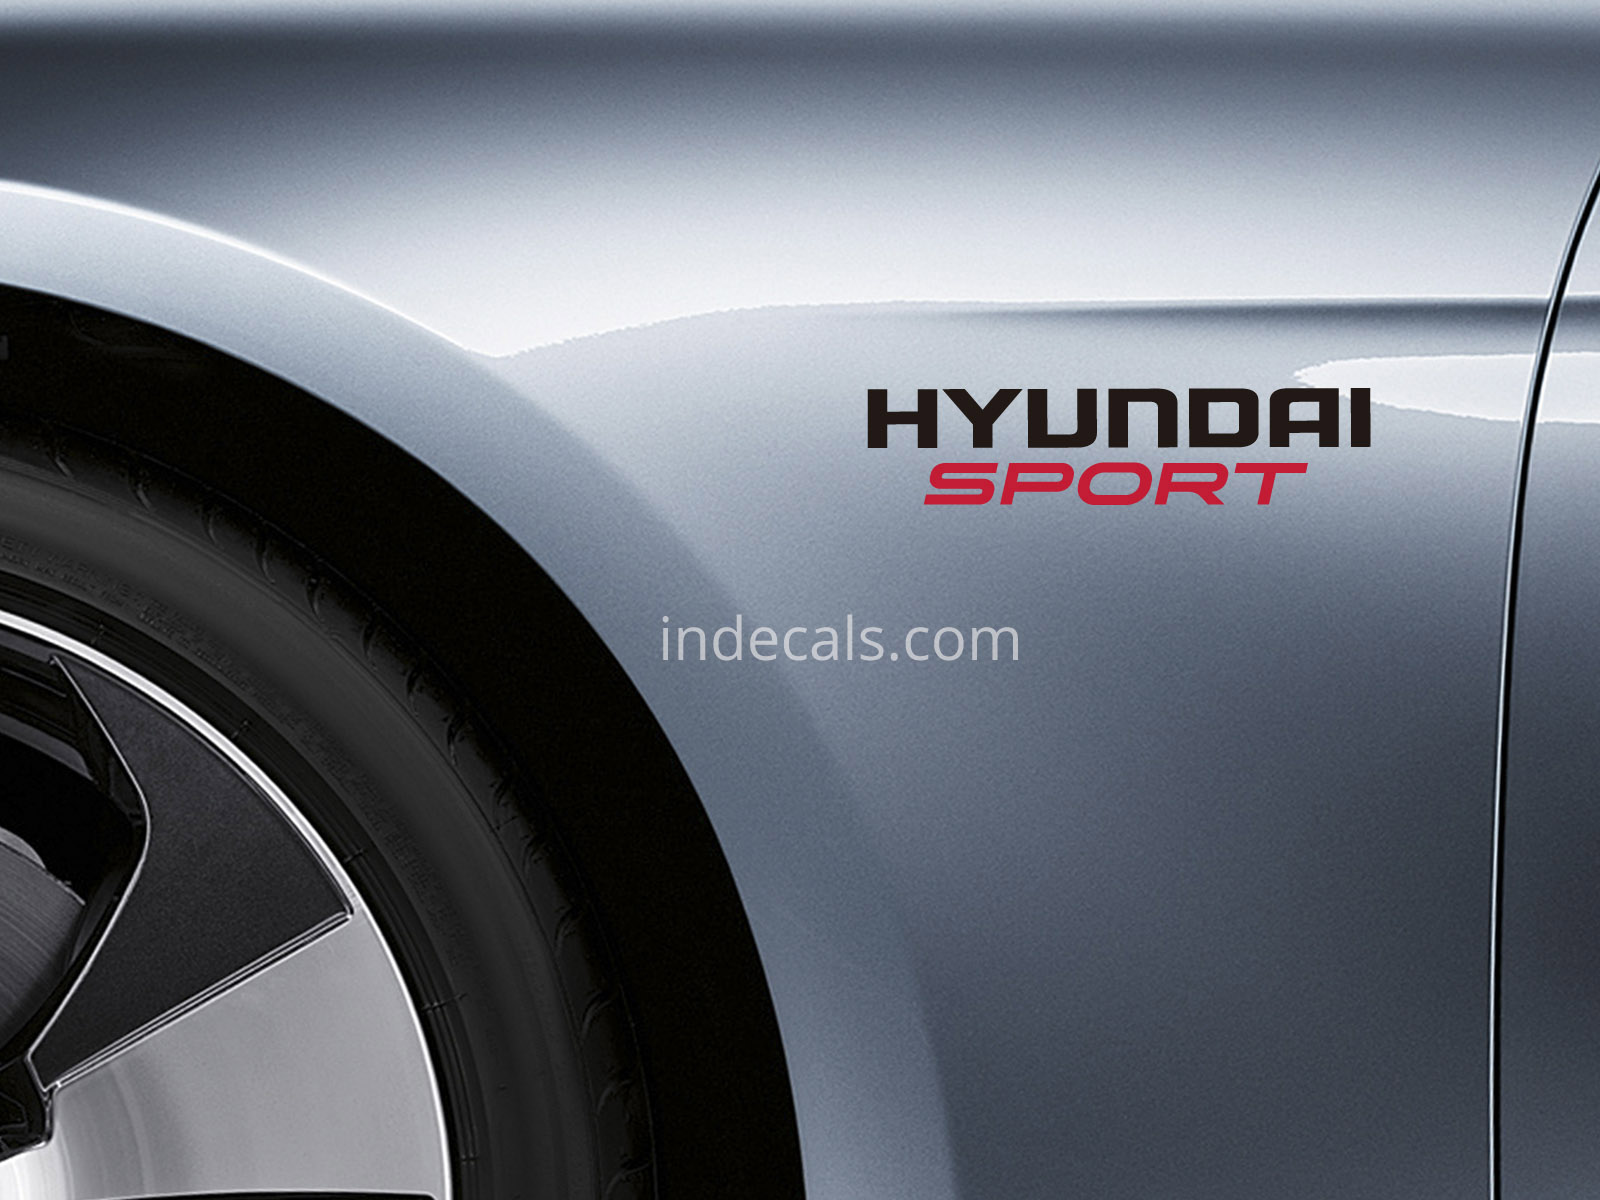 2 x Hyundai Sports stickers for Wings - Black & Red